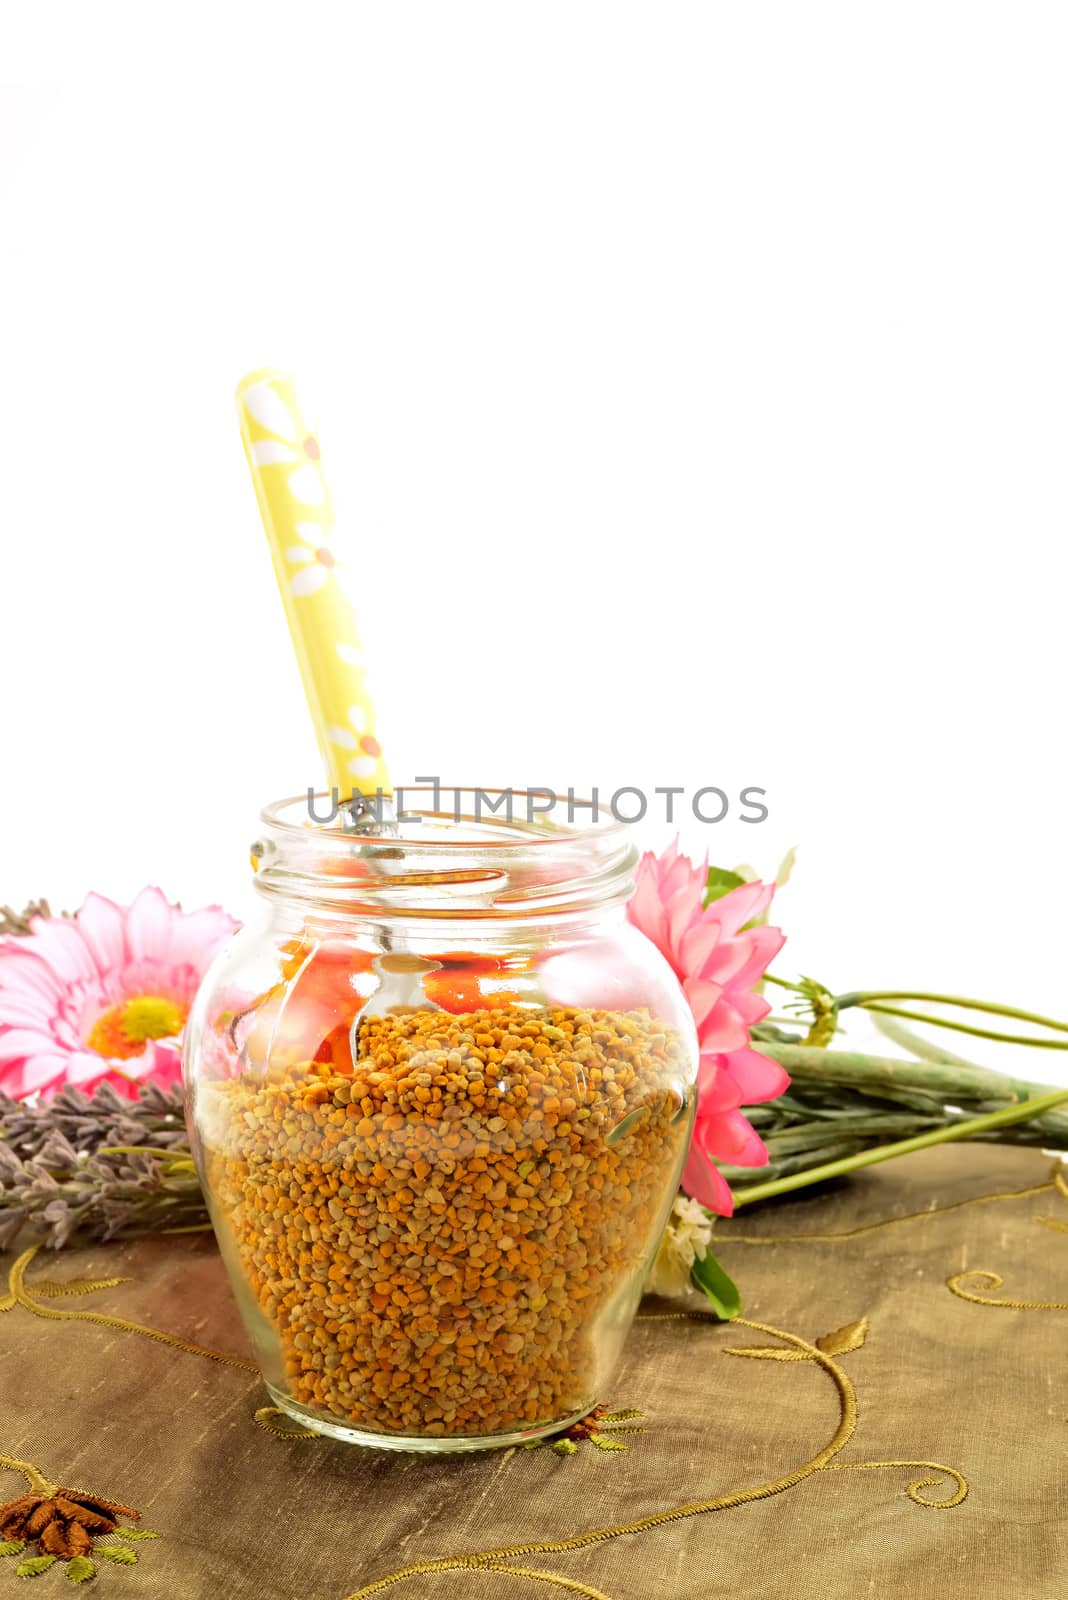 Bee pollen in glass jar and spoon by Carche